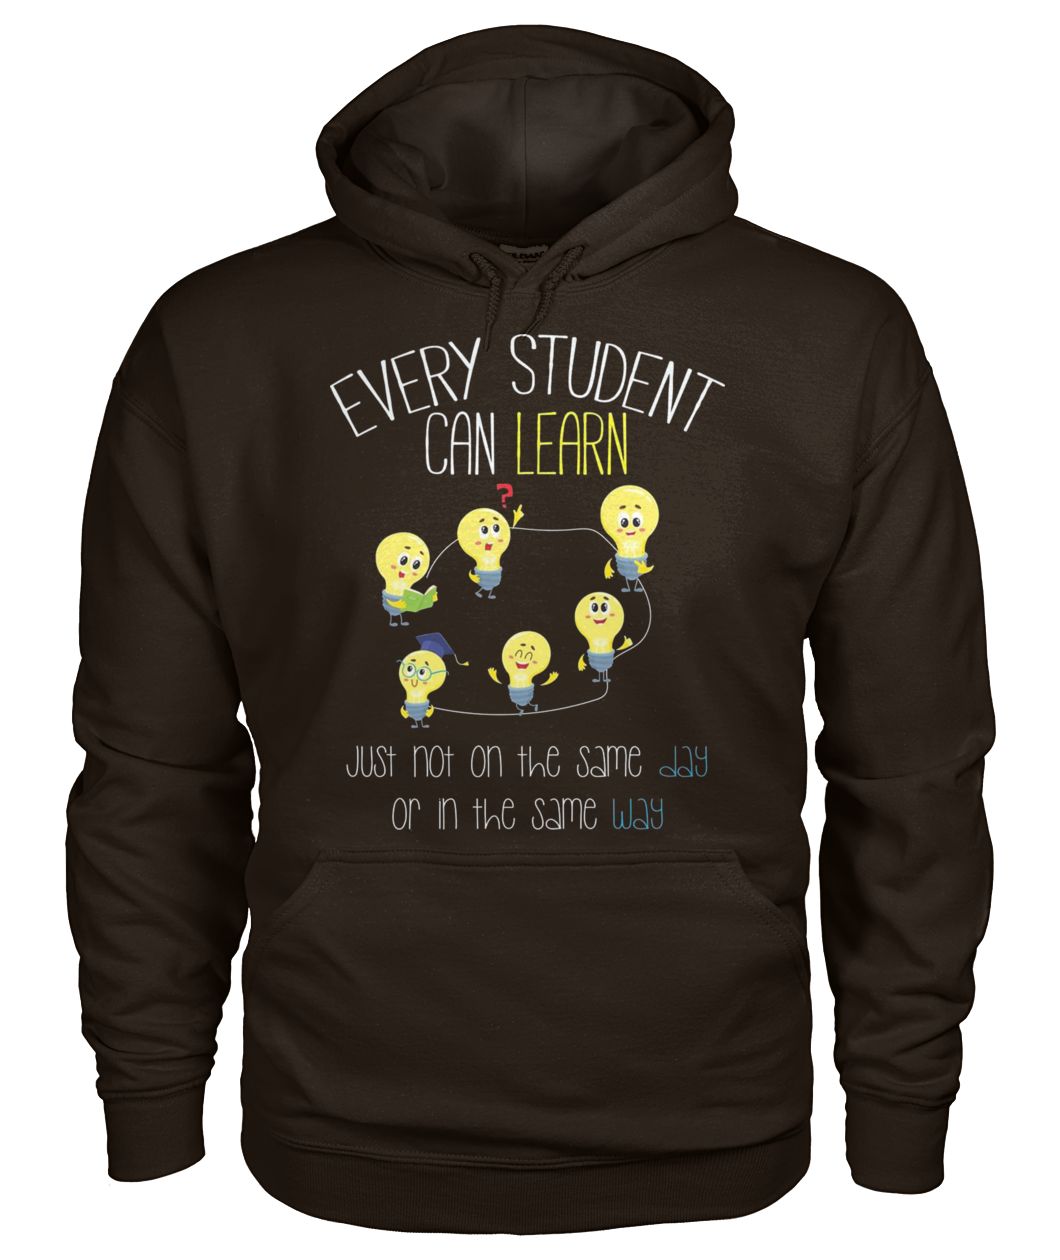 Bulds every student can learn just not on the same day gildan hoodie